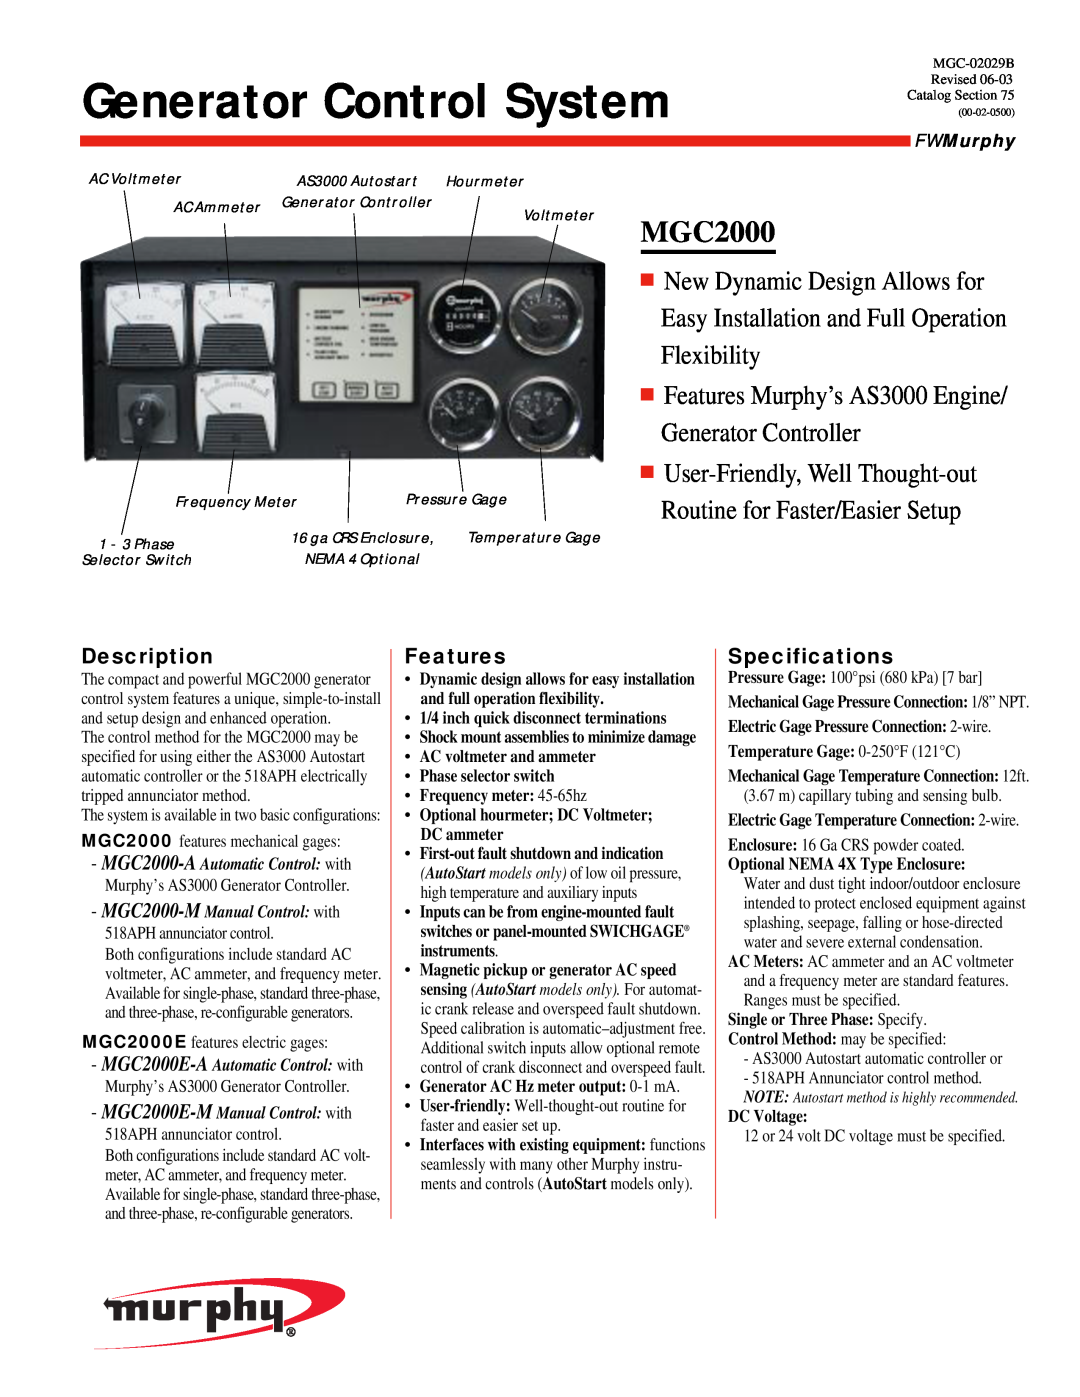 Murphy MGC2000 specifications Description, Features, Specifications, Generator Control System, FWMurphy 